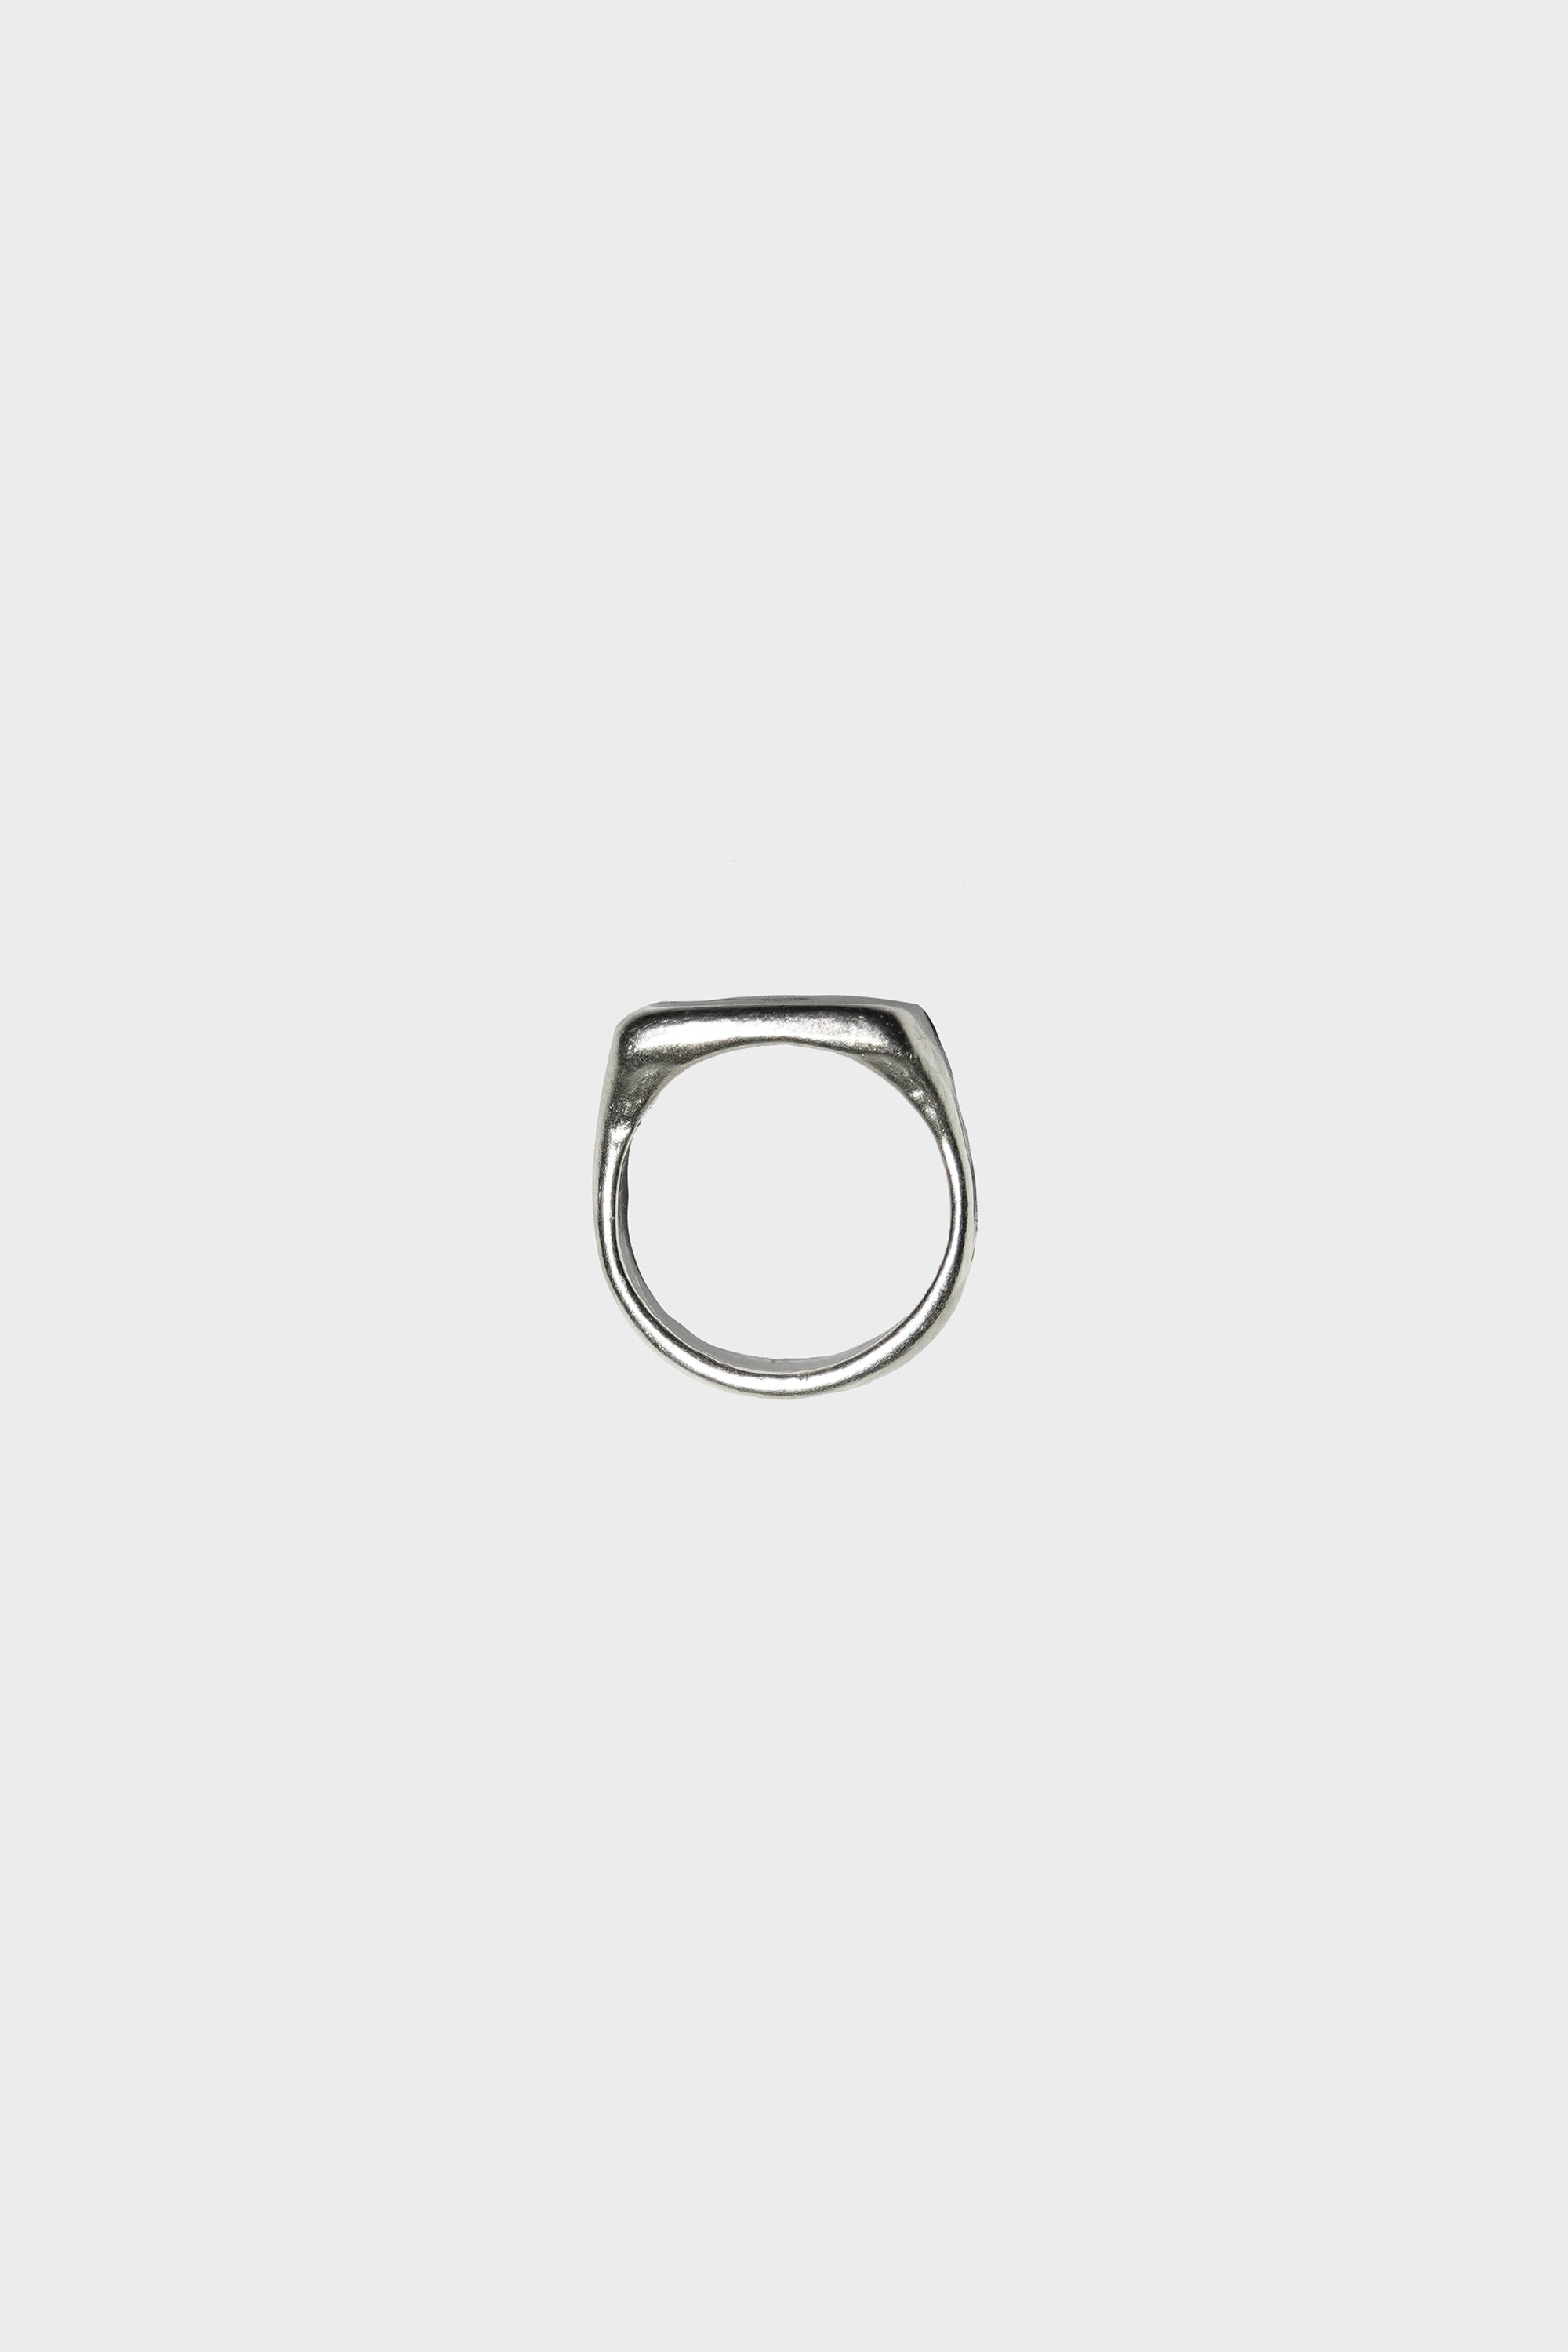 Square Signet Ring in Sterling Silver by Oxbow